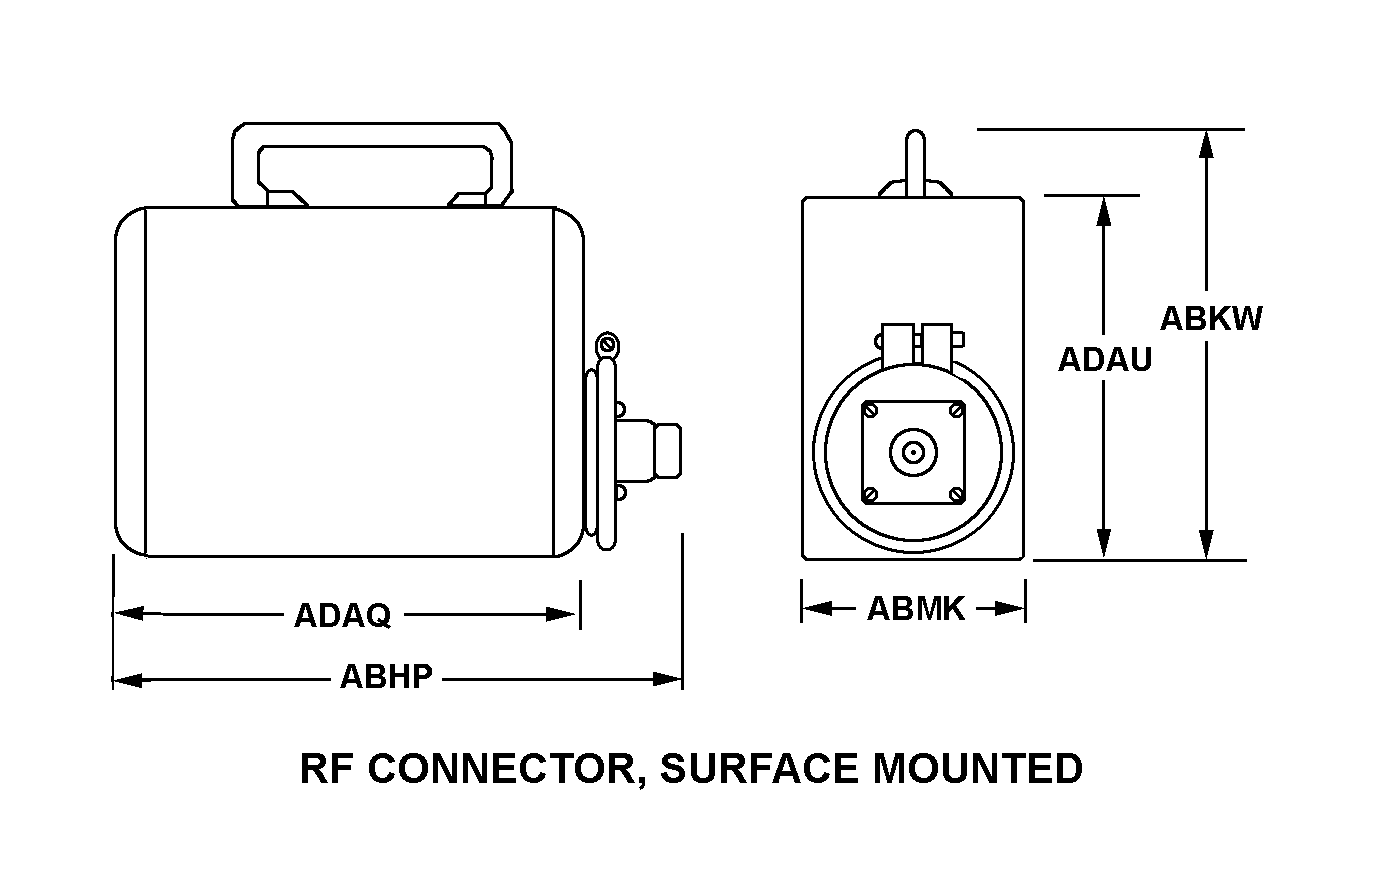 RF CONNECTOR, SURFACE MOUNTED style nsn 5985-00-923-1090